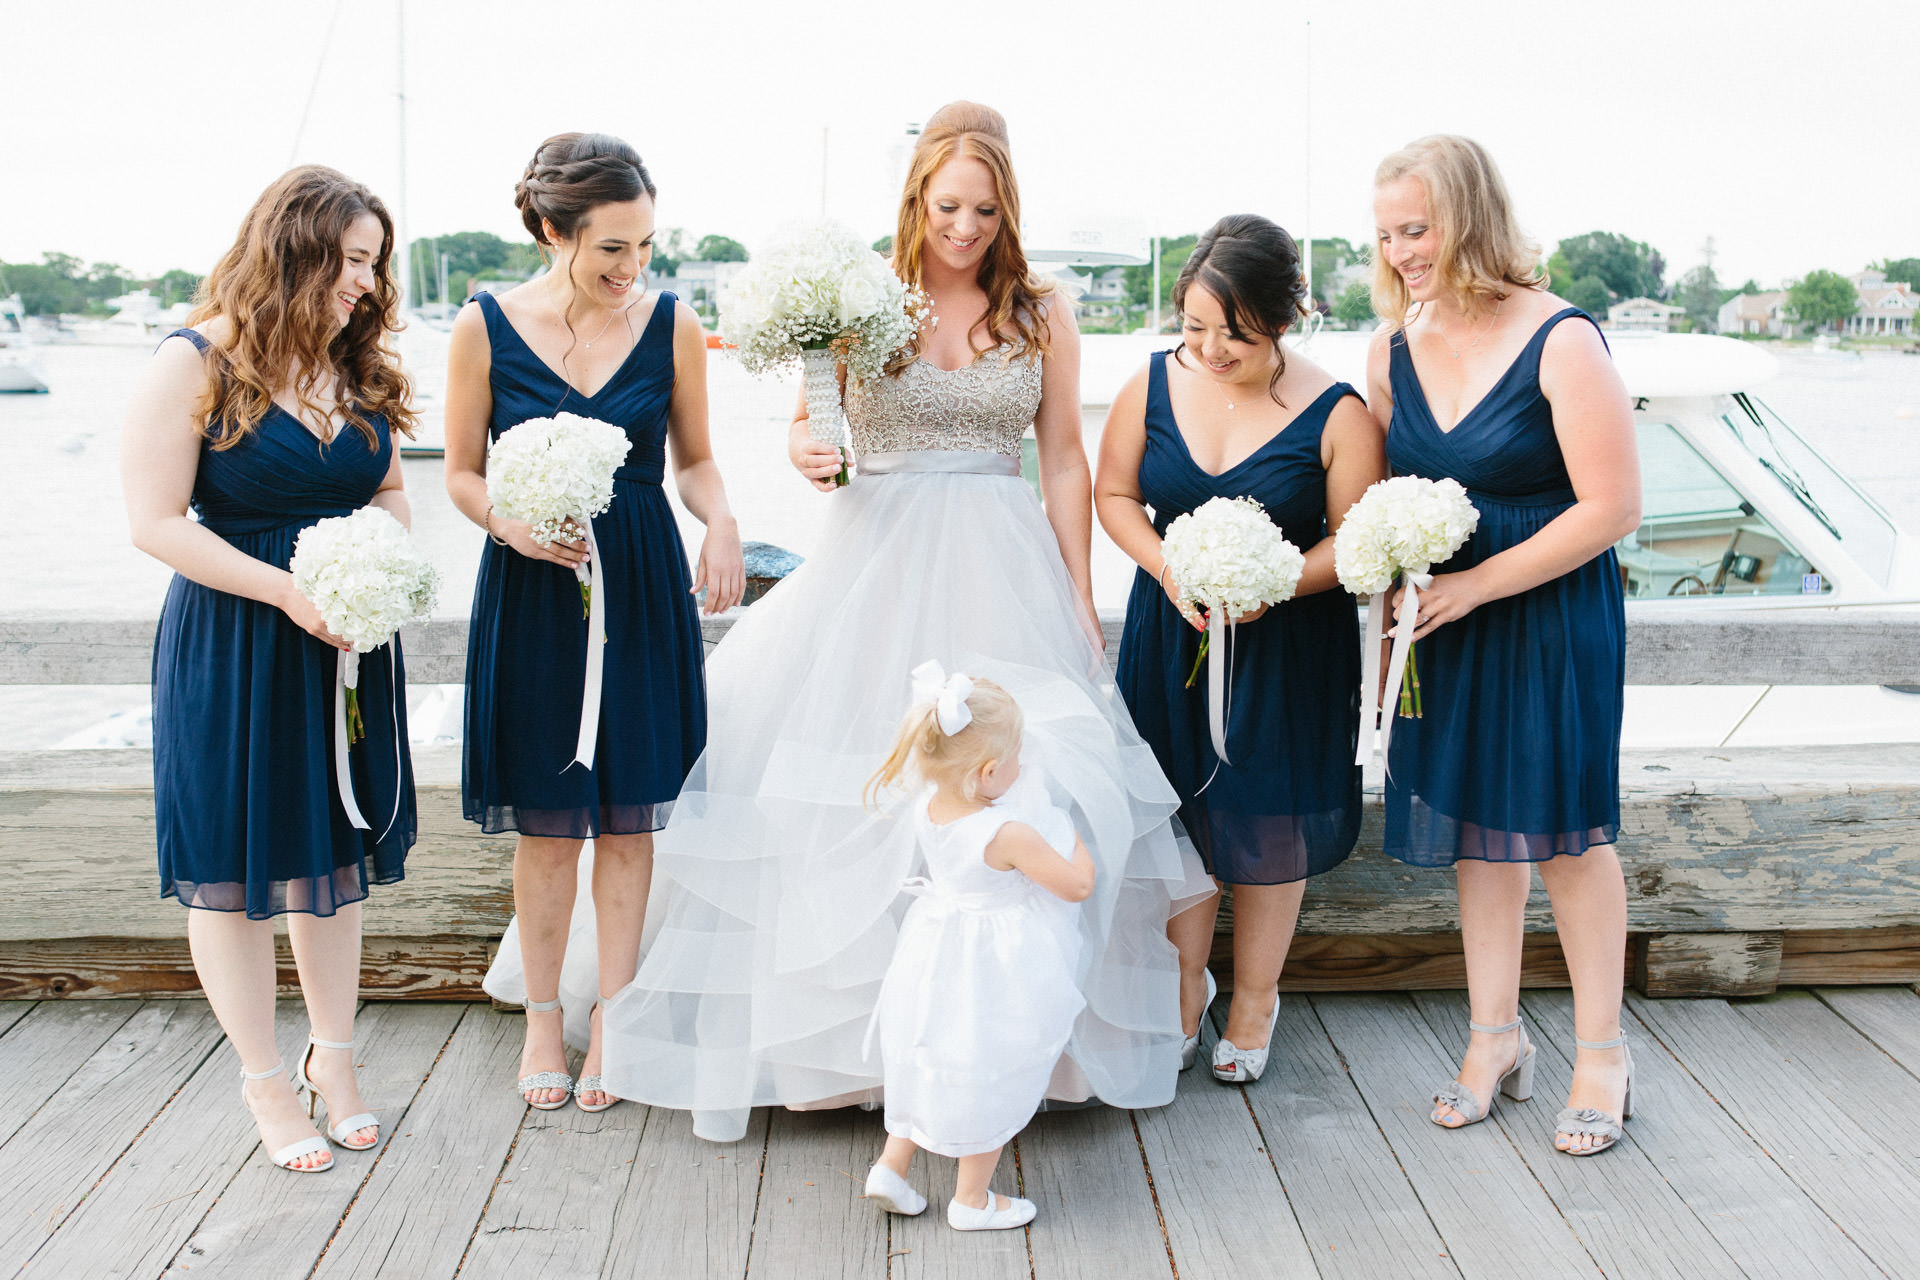 Bride and bridesmaids playing with flower girl